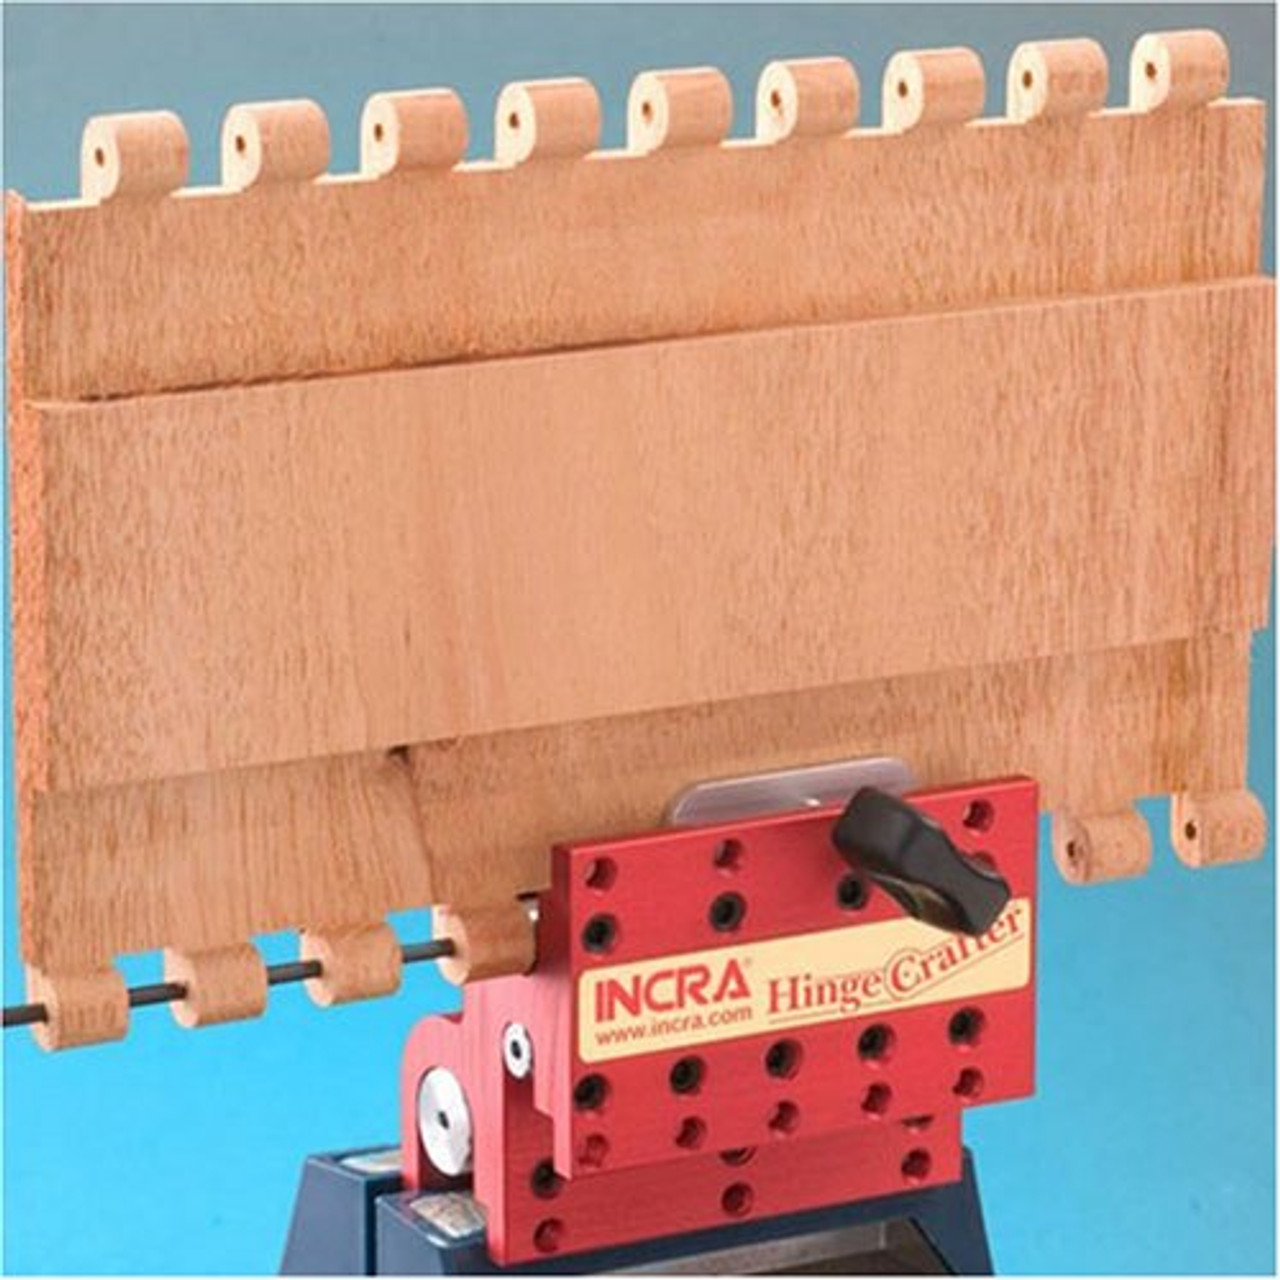 INCRA HingeCrafter Wooden Hinge Drill Guide for Hinges up to 10" Long in 4 Sizes